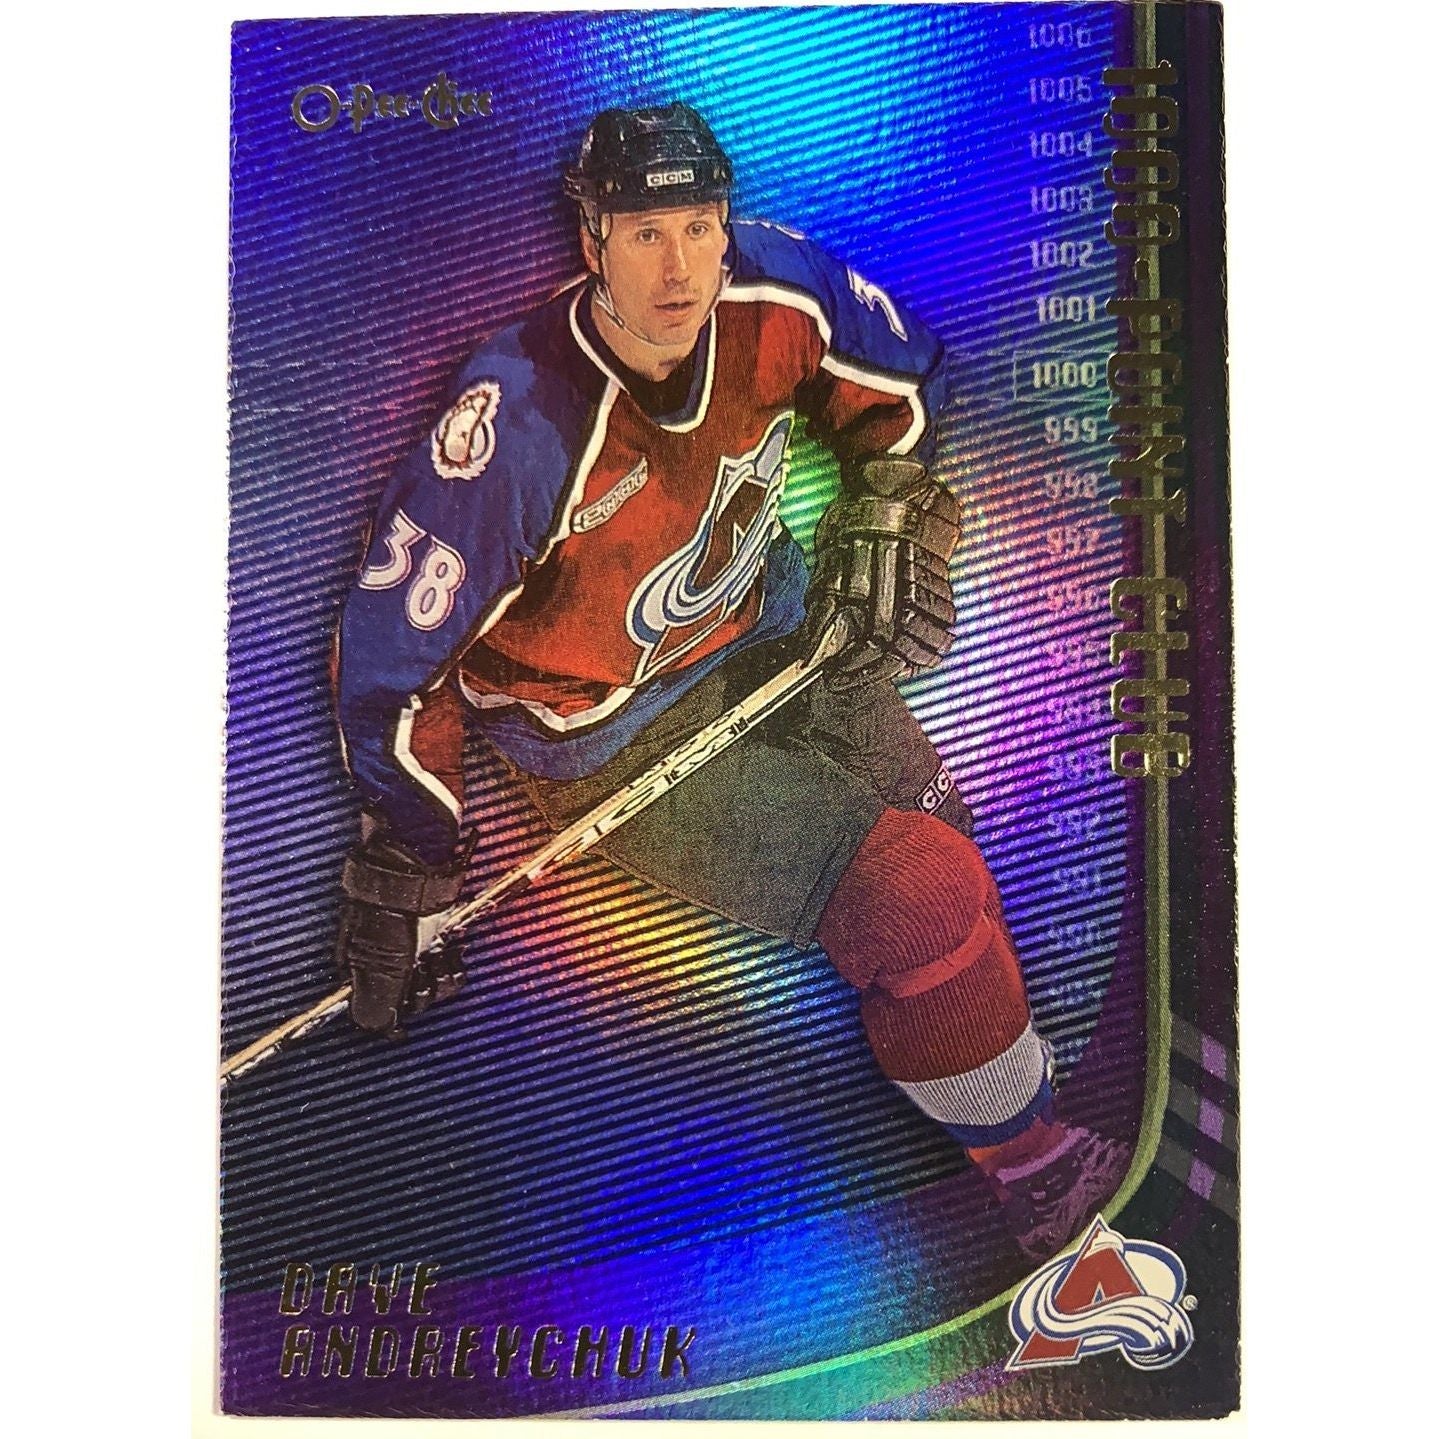  1999-00 O-Pee-Chee Dave Andreychuk 1000 Point Club  Local Legends Cards & Collectibles